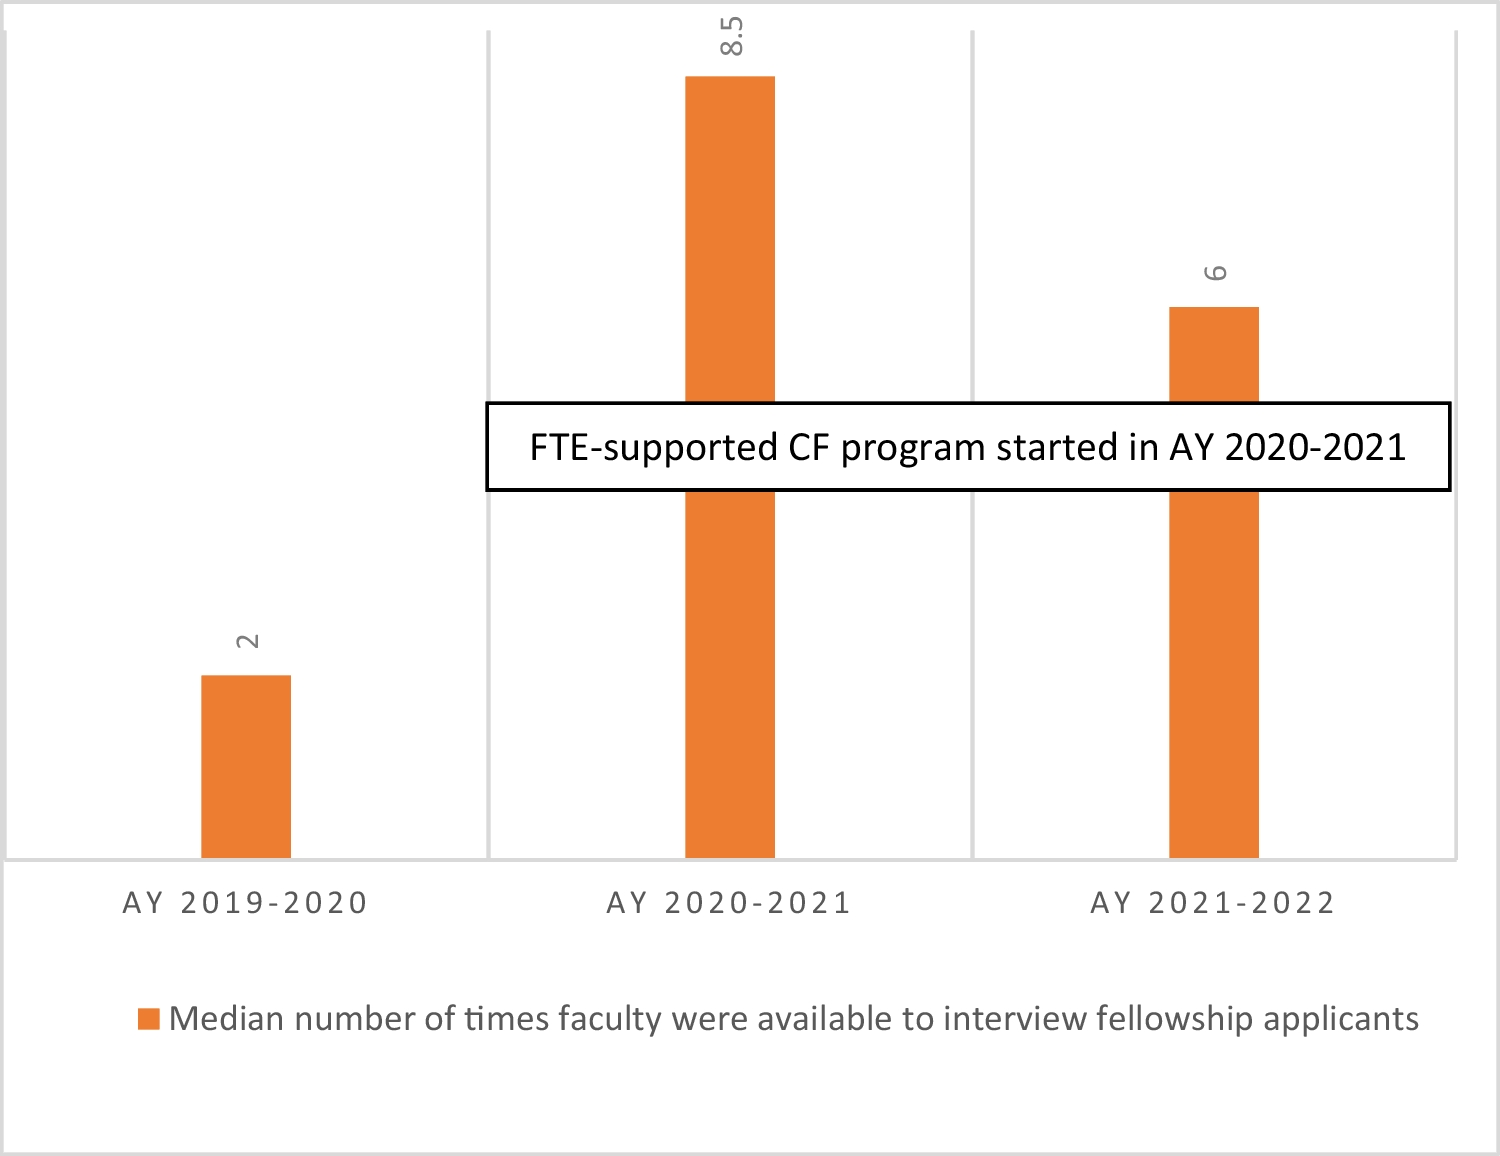 Providing 0.1 Full-Time Equivalent (FTE) Support to Fellowship Core Faculty Improves Faculty Involvement in Fellowship Education and Recruitment